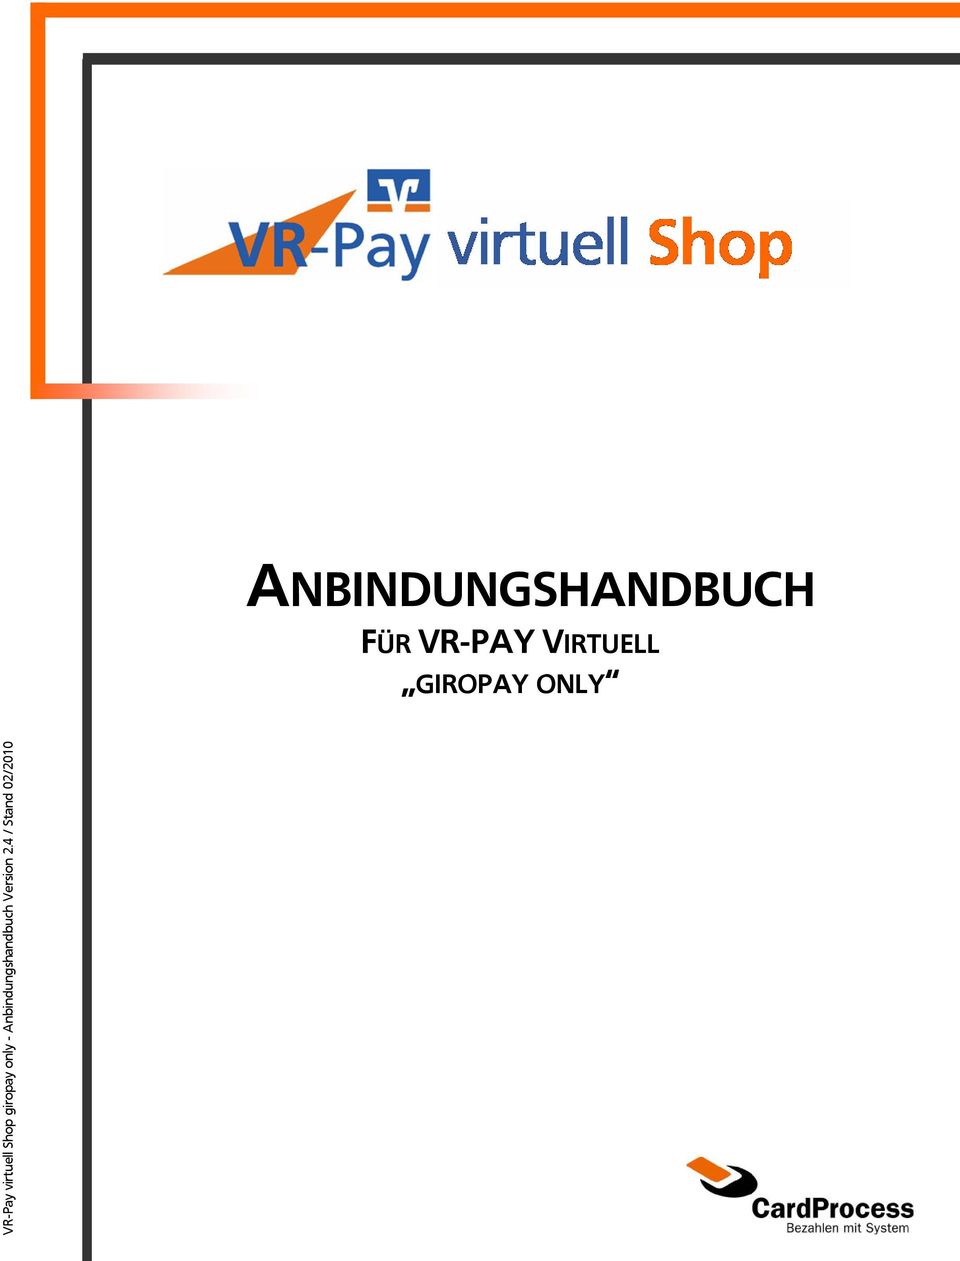 virtuell Shop giropay only -